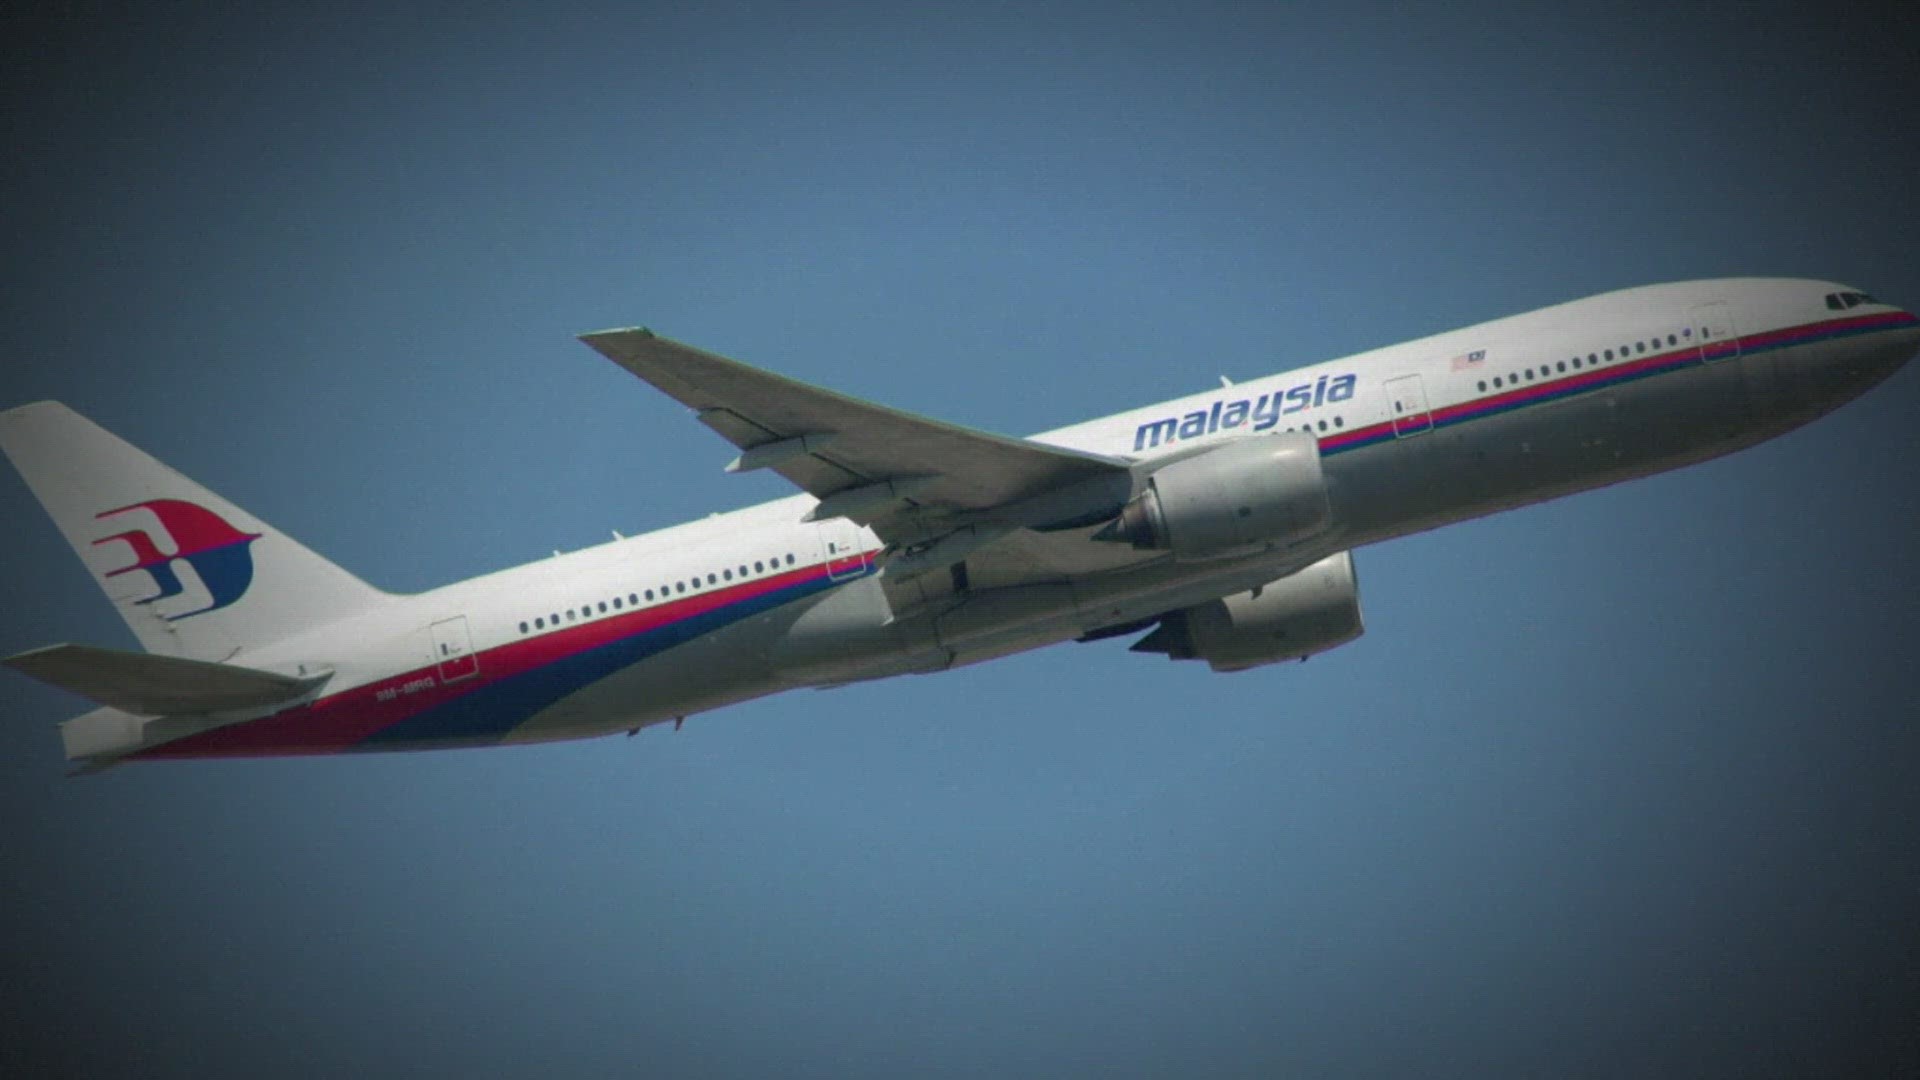 The plane carrying 239 people from the Malaysian capital, Kuala Lumpur, to Beijing, vanished from radar shortly after taking off on Mar. 8, 2014.